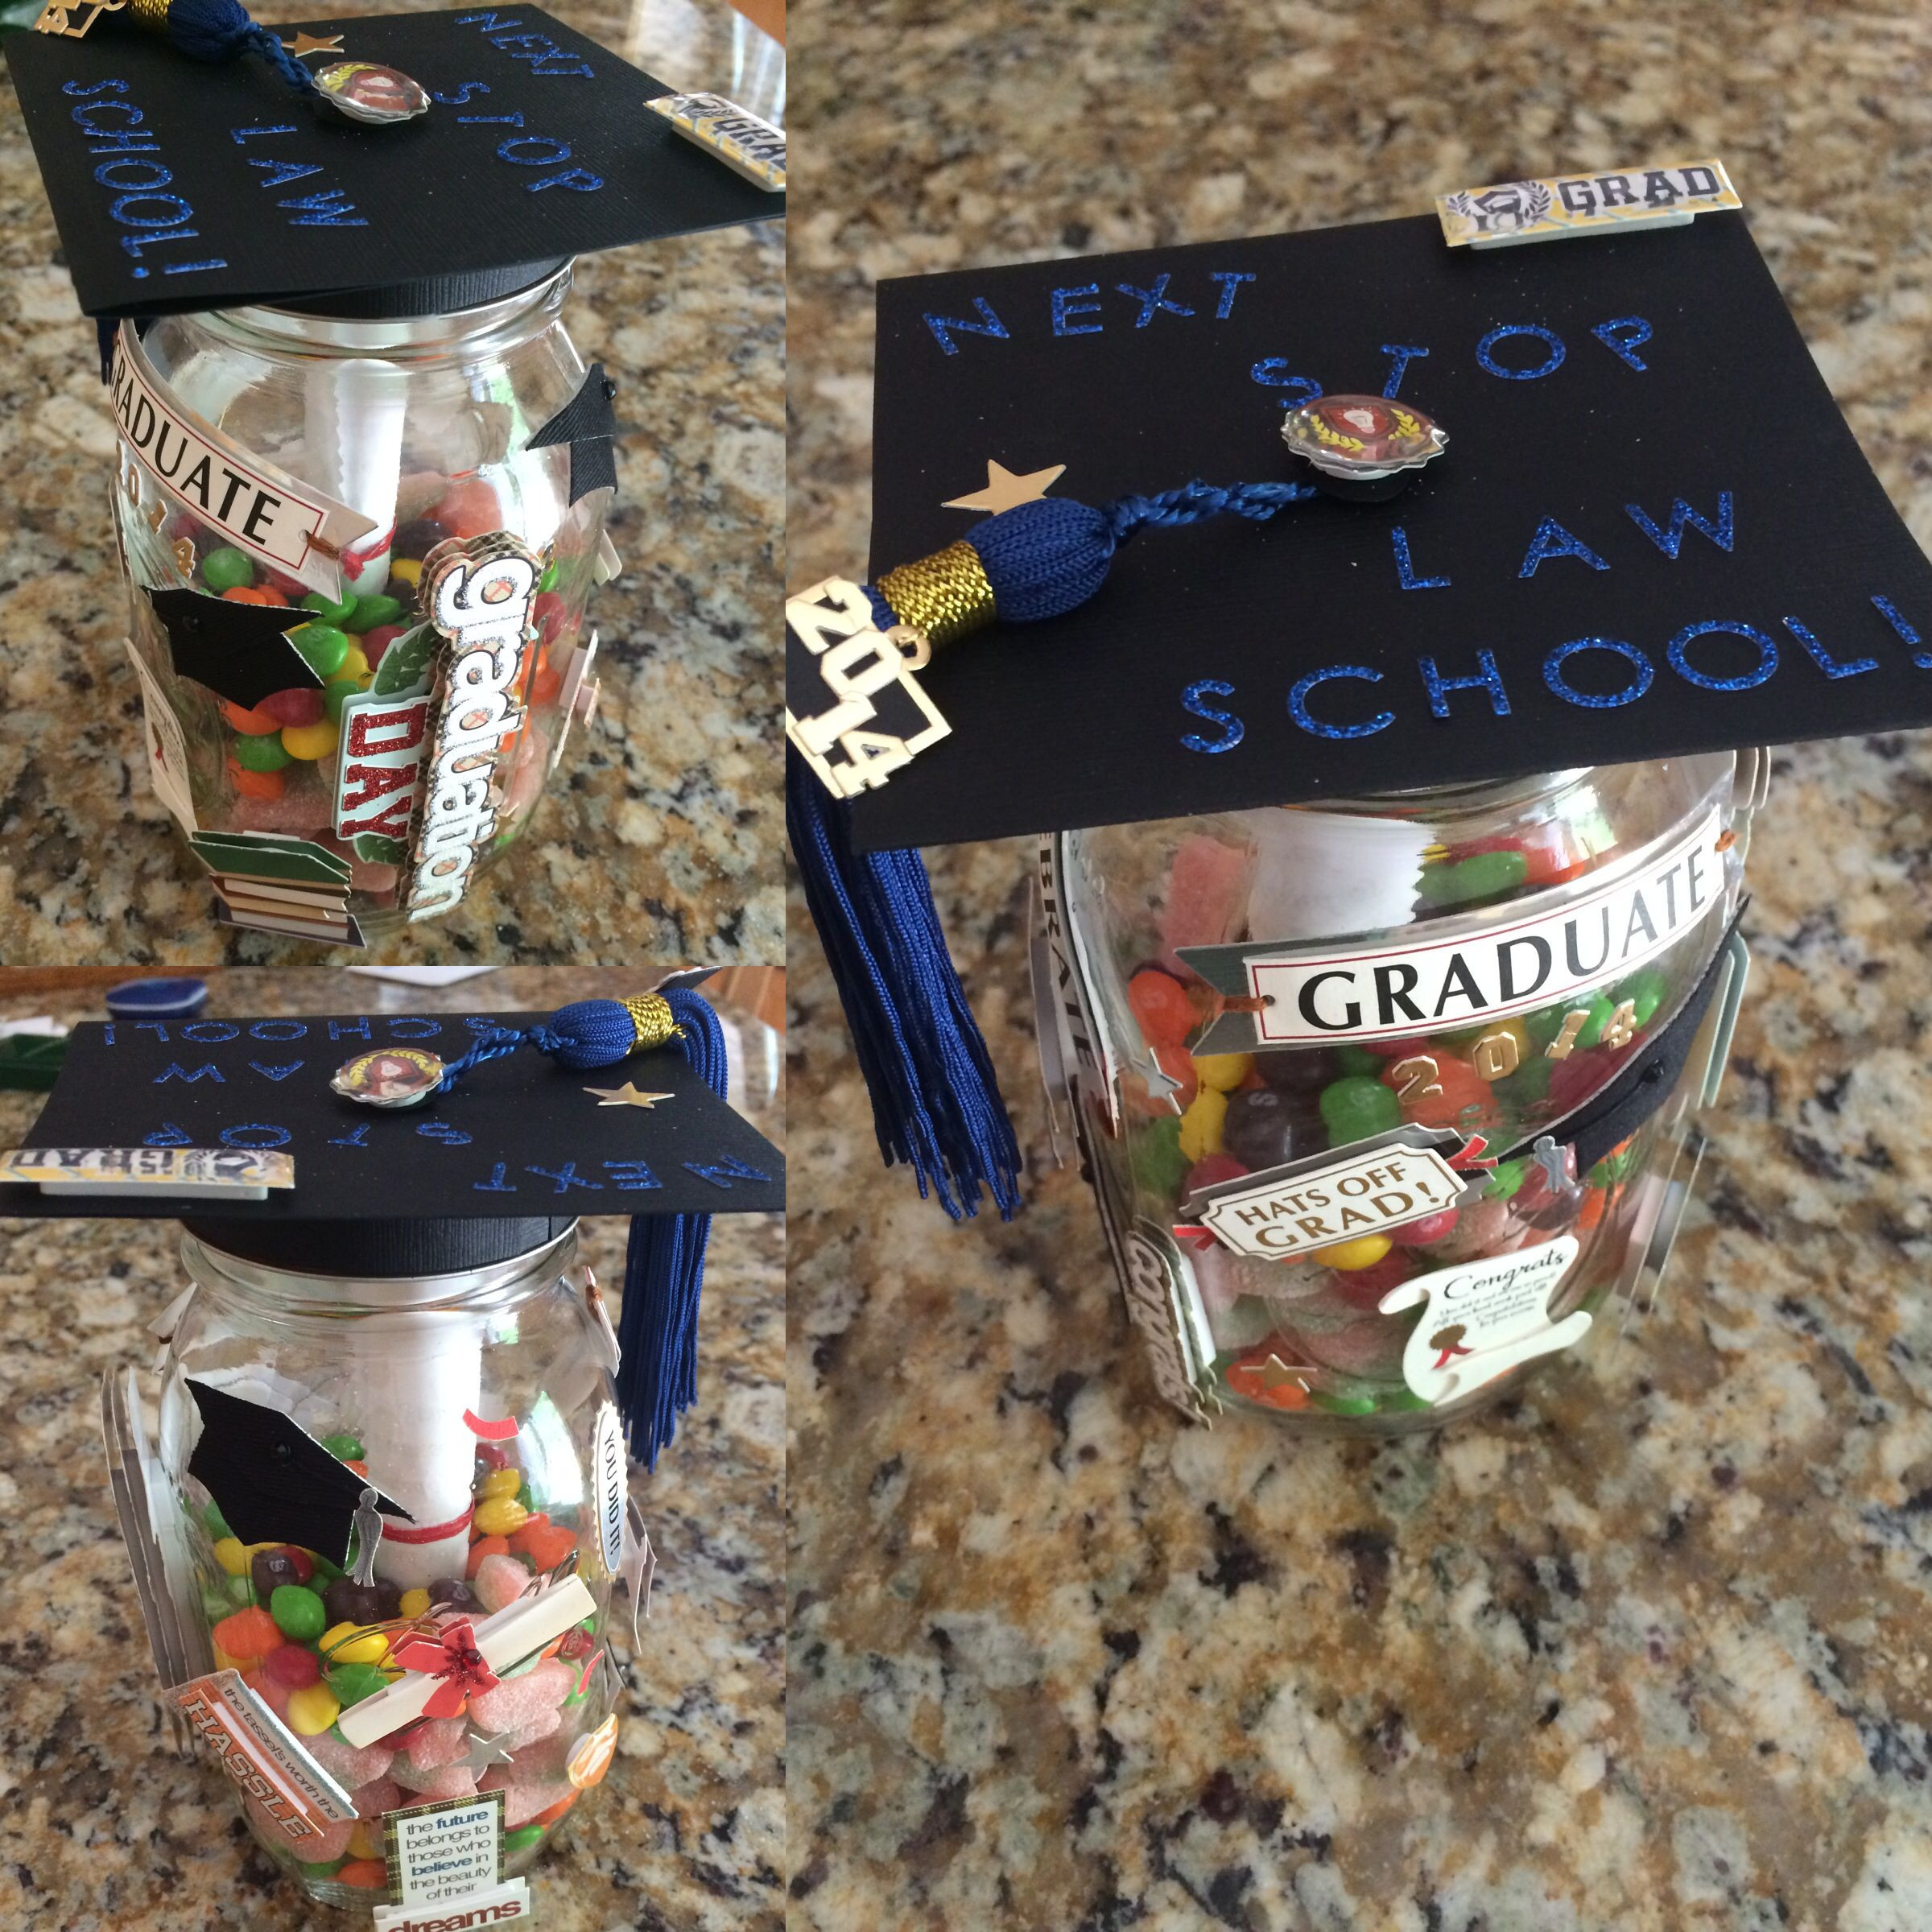 25 Of the Best Ideas for Graduation Gift Ideas for Him Home, Family